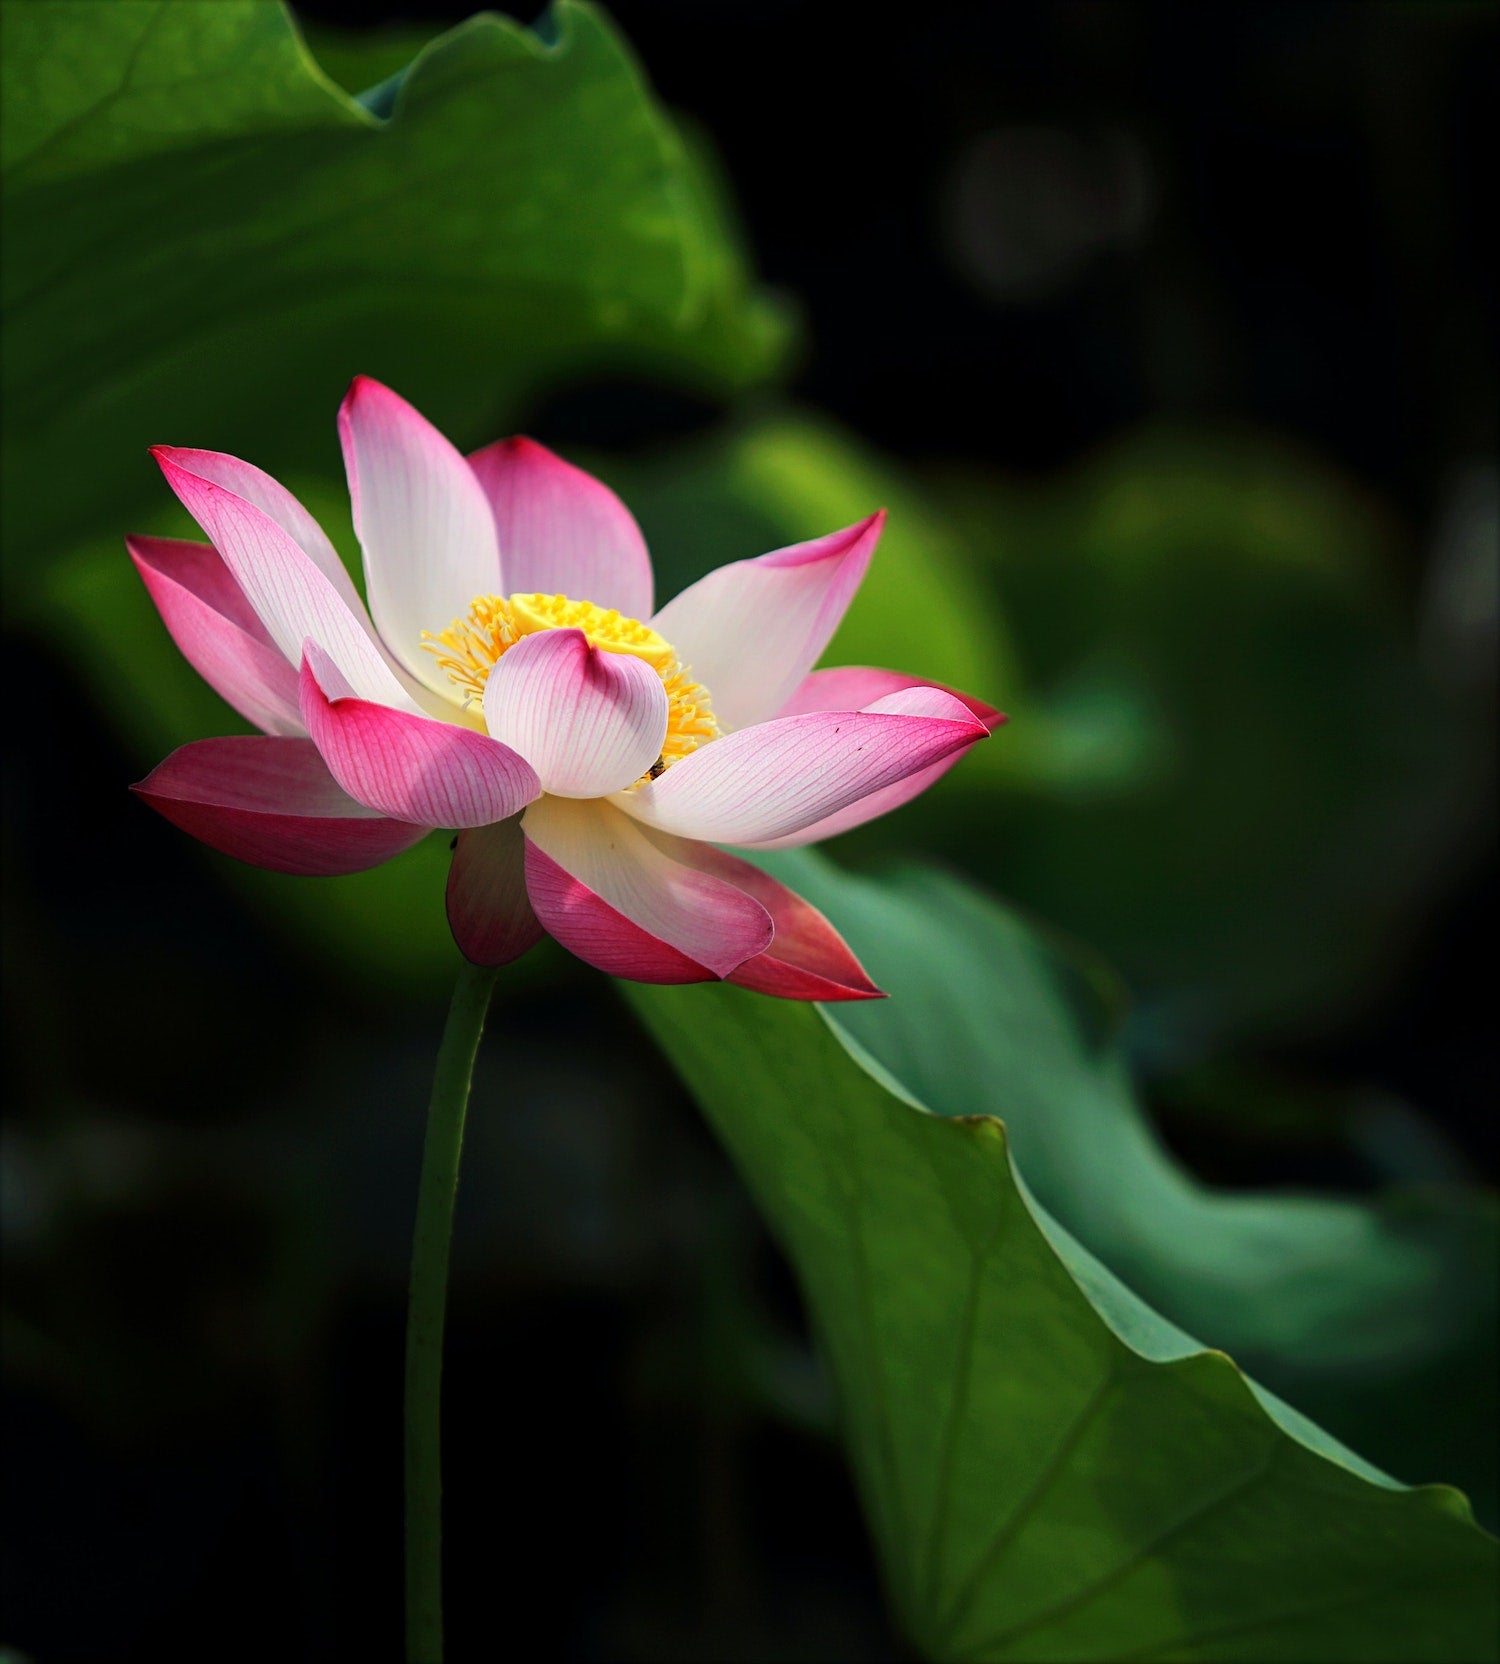 Pink Lotus Meaning: Enlightenment, Beauty and Unconditional Love